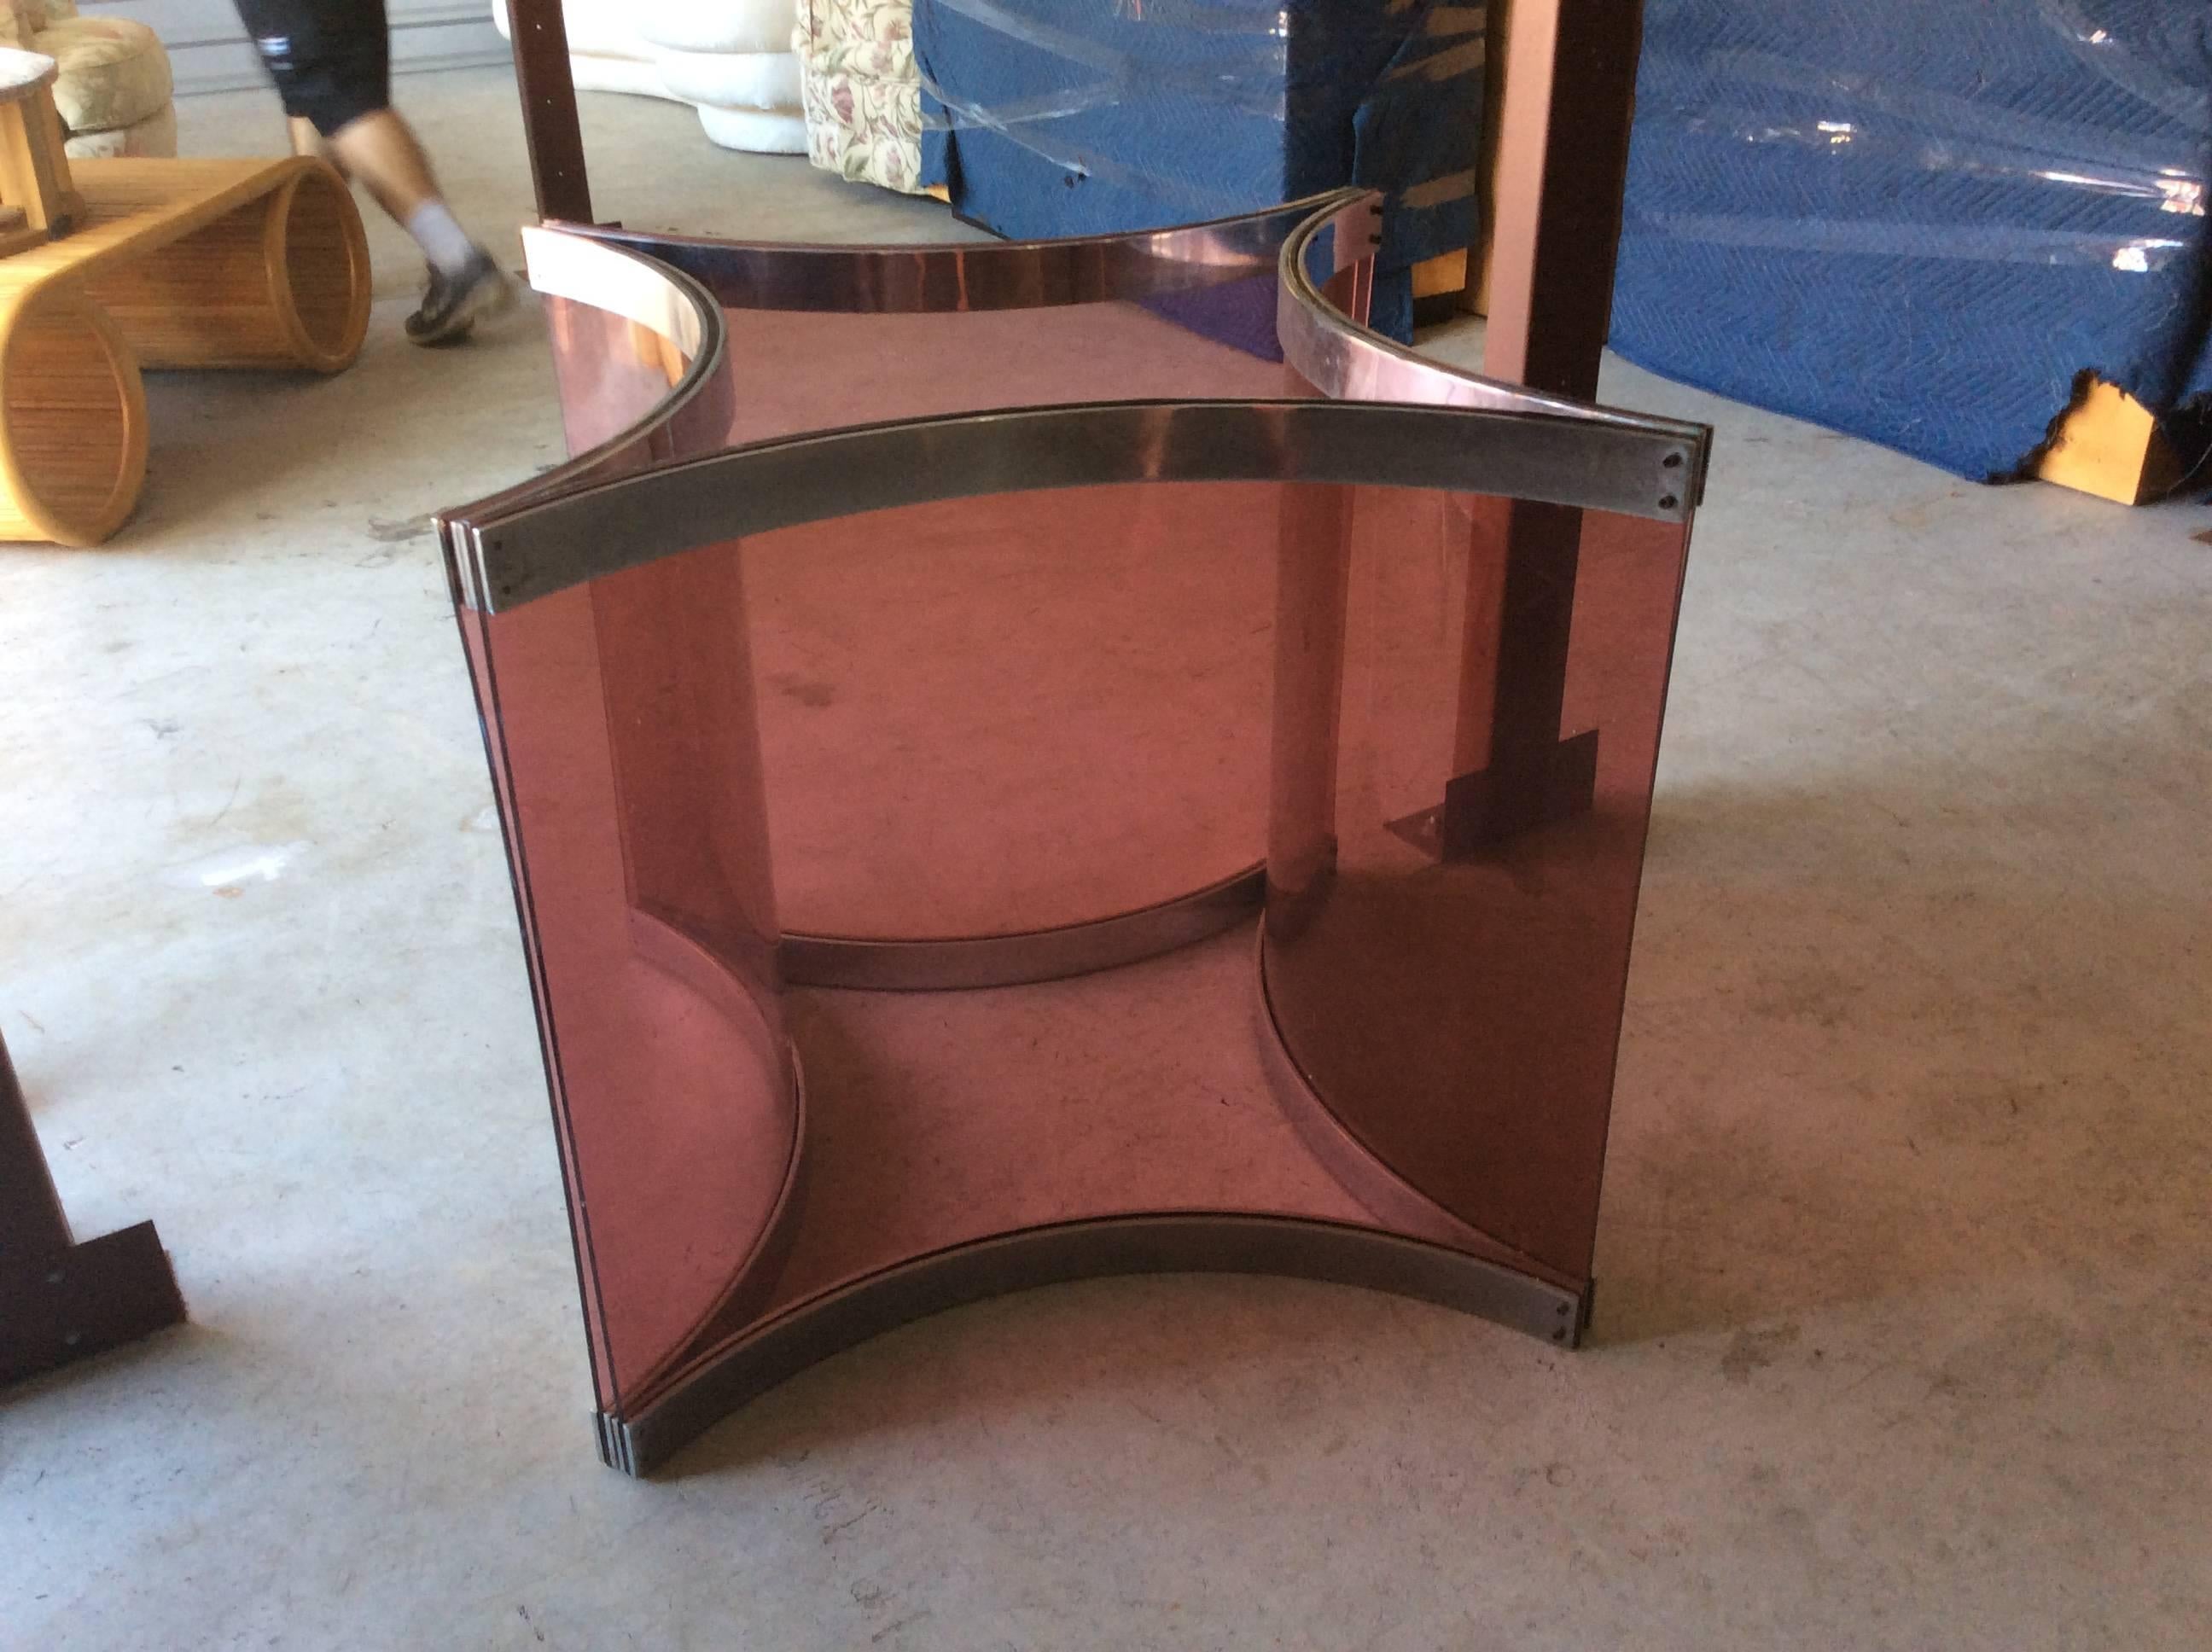 Rare vintage mid century modern Alessandro Albrizzi purple lucite and chrome dining table or game table base. Chrome and lucite will be polished prior to shipping. Glass top not included. 